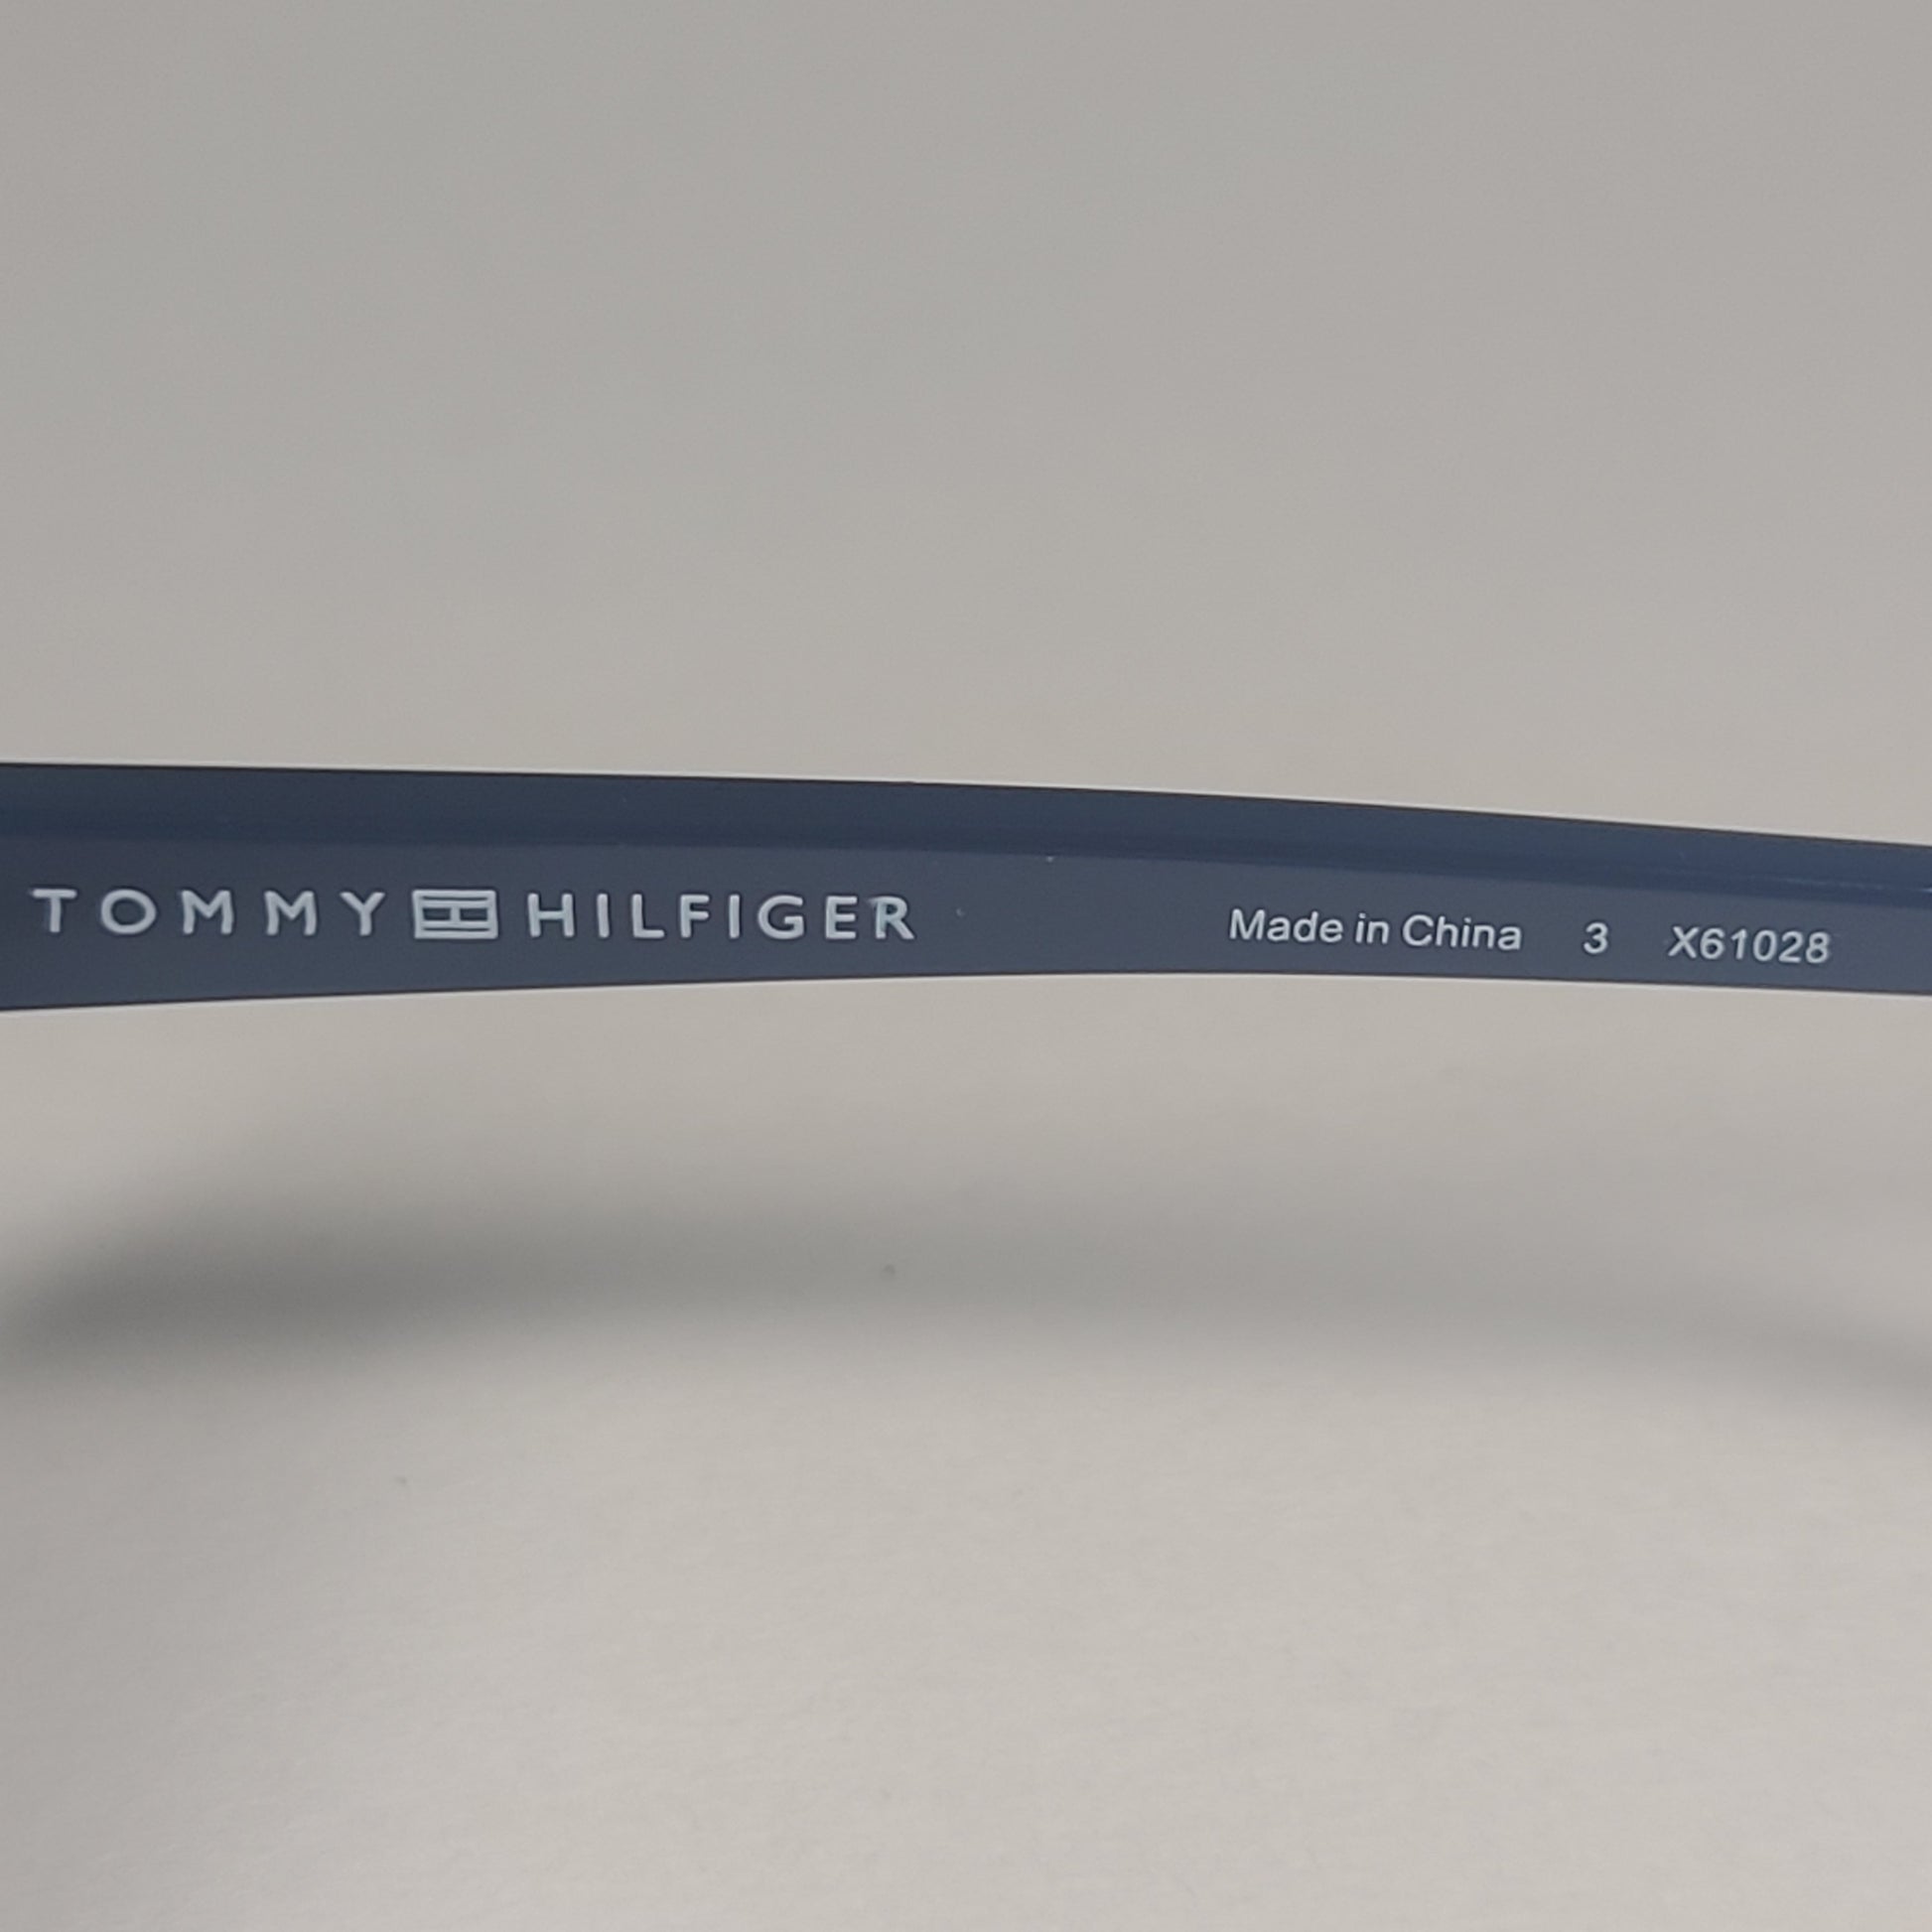 Tommy Hilfiger WP OL607P Polarized Large Oval Sunglasses Two Tone Black & Navy Gray Lens 57mm - Sunglasses